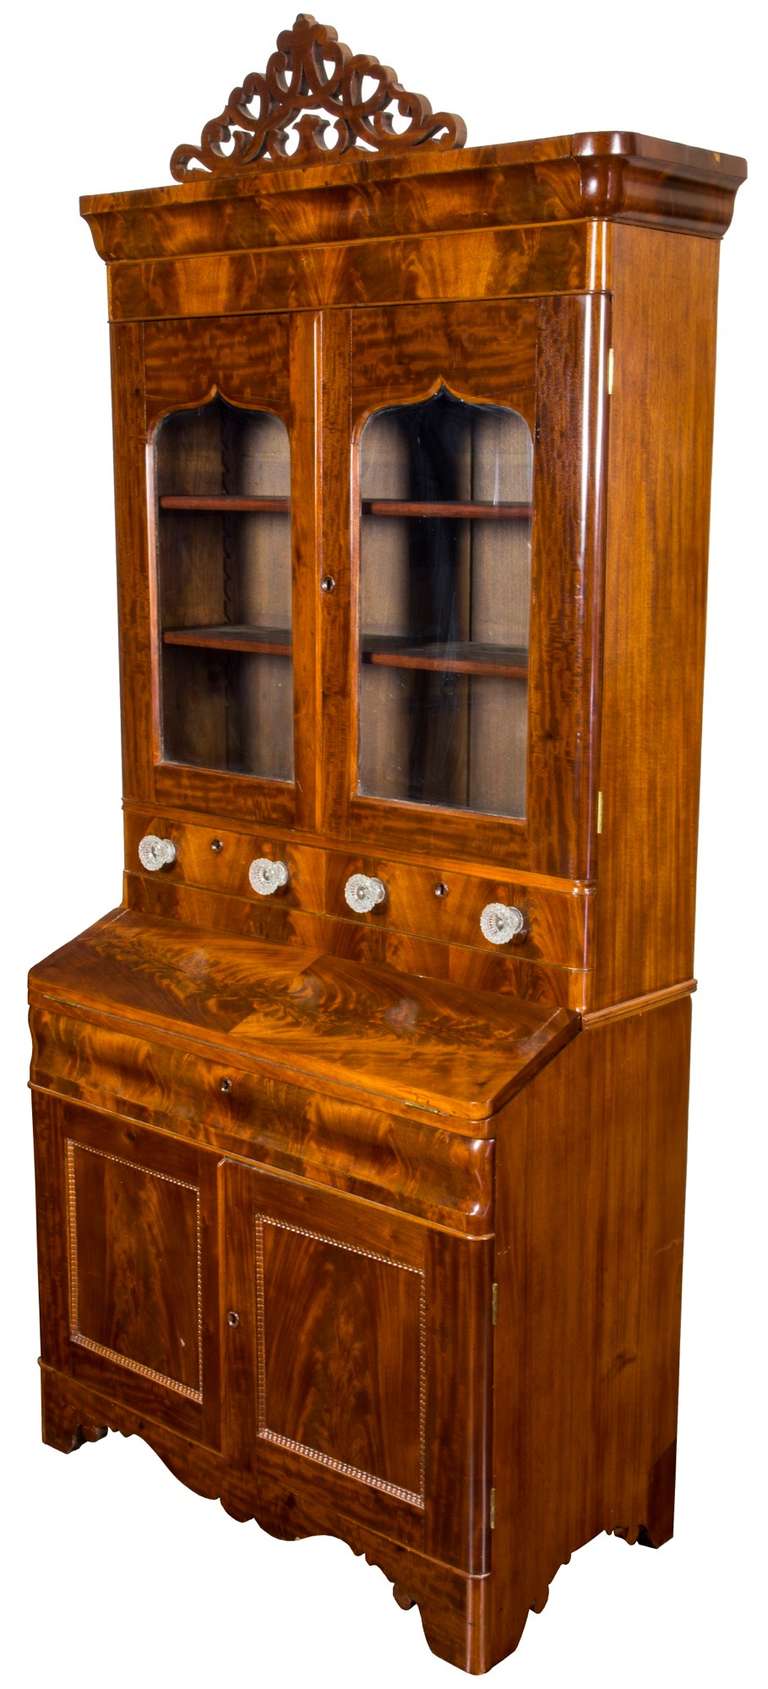 This secretary employs Classic Gothic arches in its upper doors, which are generally in-filled from behind with either fabric or left open as a bookcase, given the full shelving. The upper pediment retains its original open scrolled fretwork above a